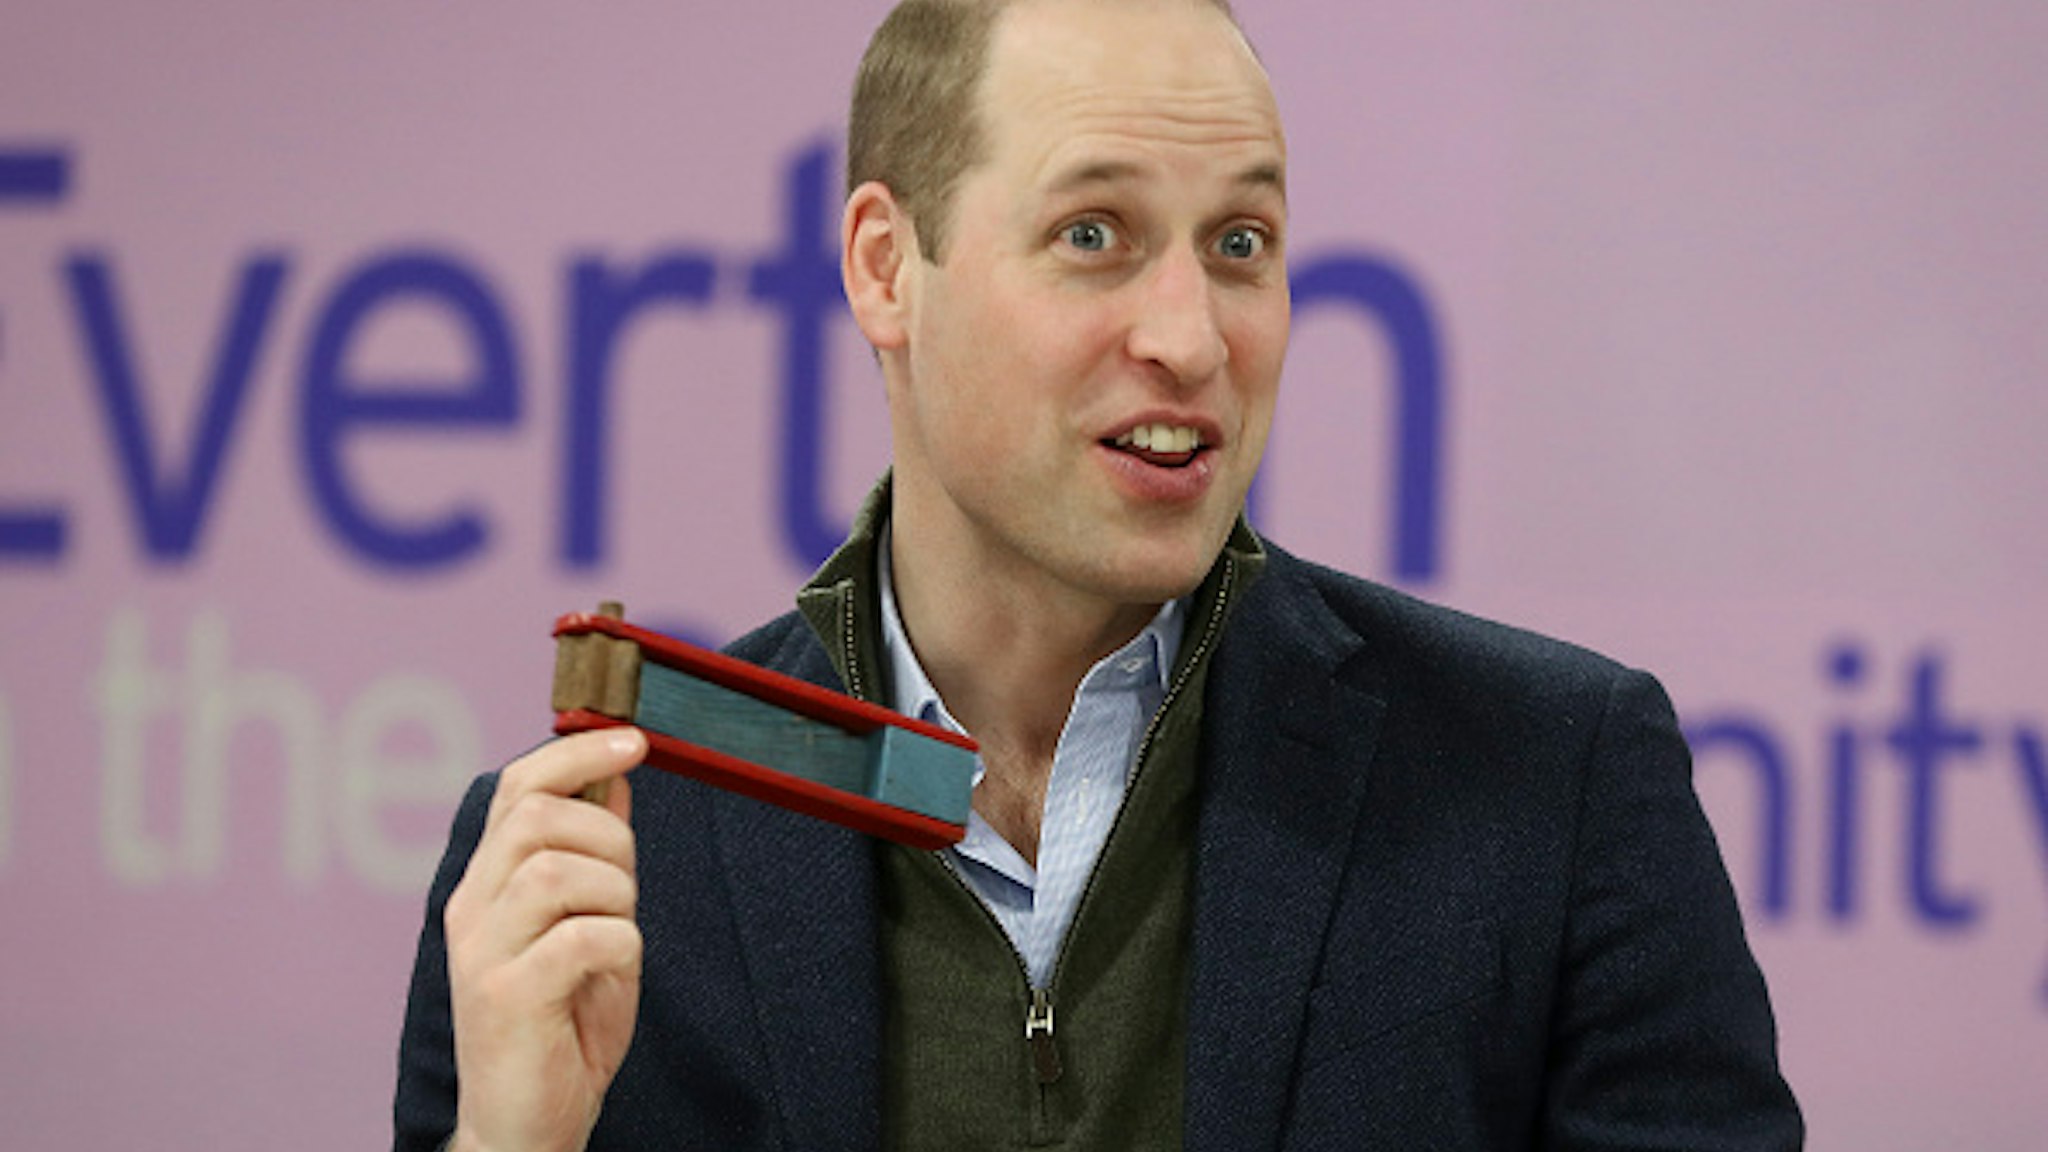 Britain's Prince William, Duke of Cambridge uses a memorabilia rattle during a visit to Everton Football Club's official charity Everton in the Community, in Liverpool on January 30, 2020, as part of the Heads Up mental health campaign.